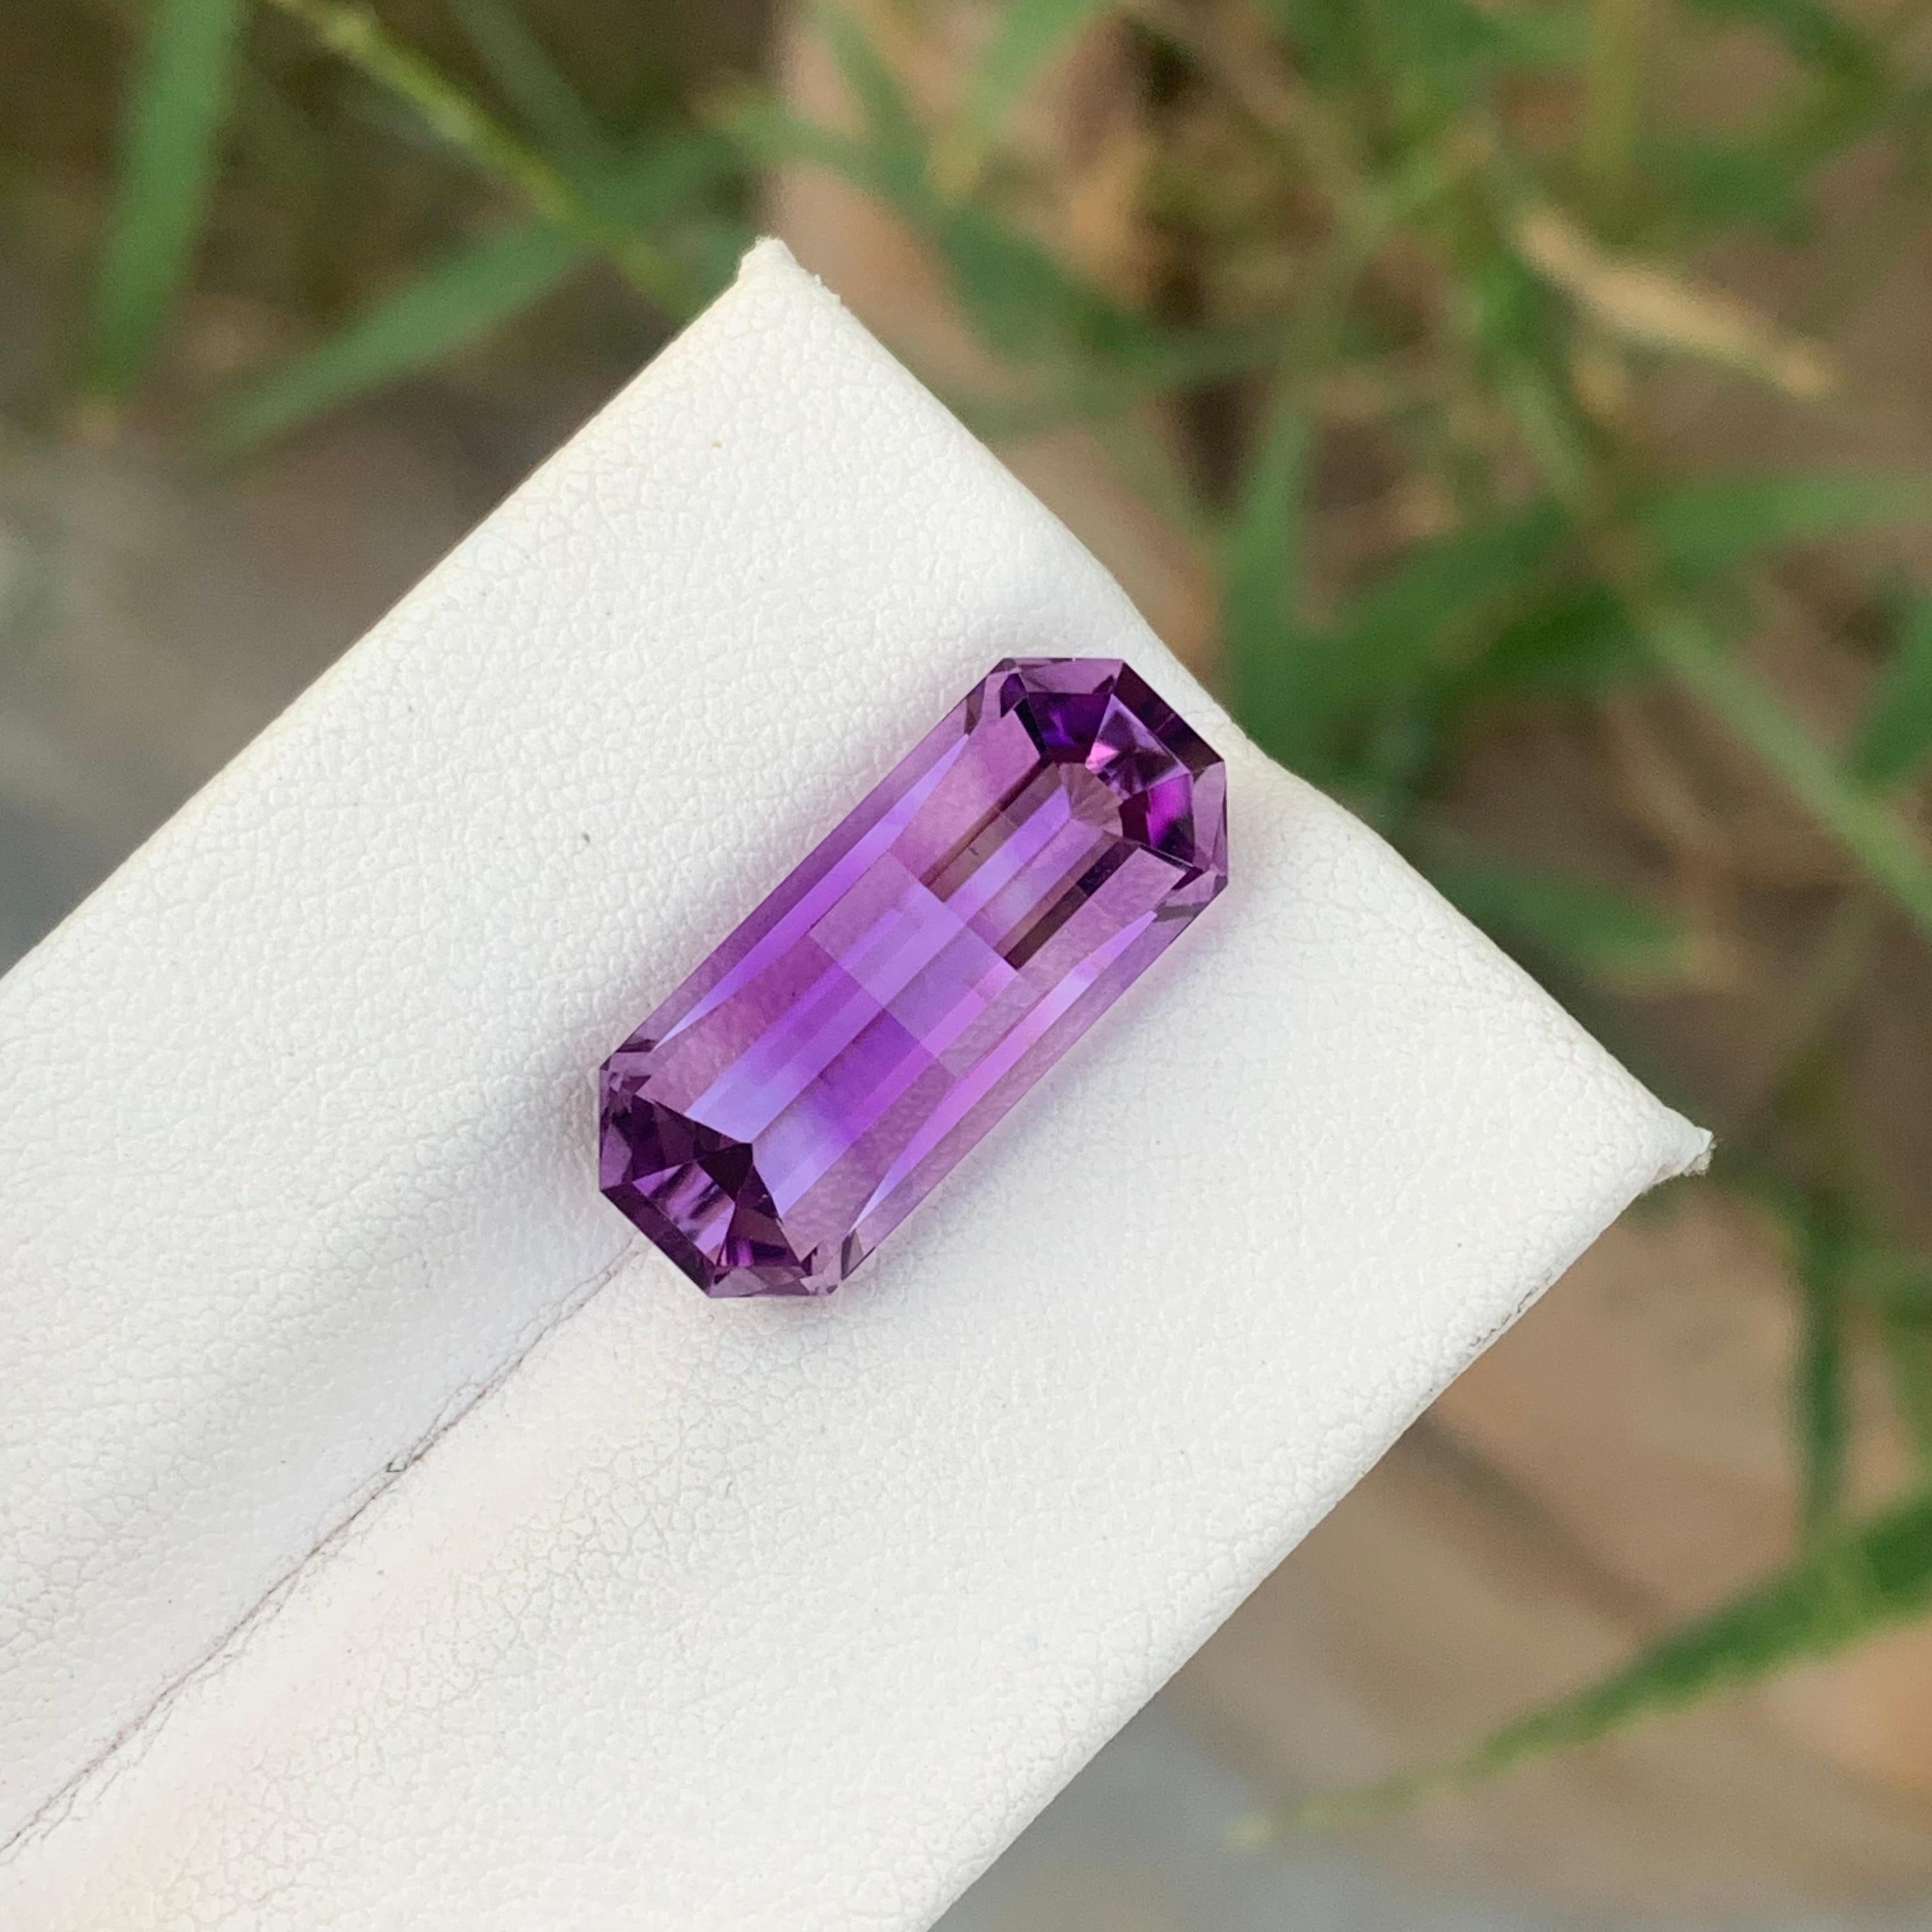 8.25cts Natural Loose Amethyst Gemstone Pixel Pixelated Cut From Brazil Mine For Sale 8